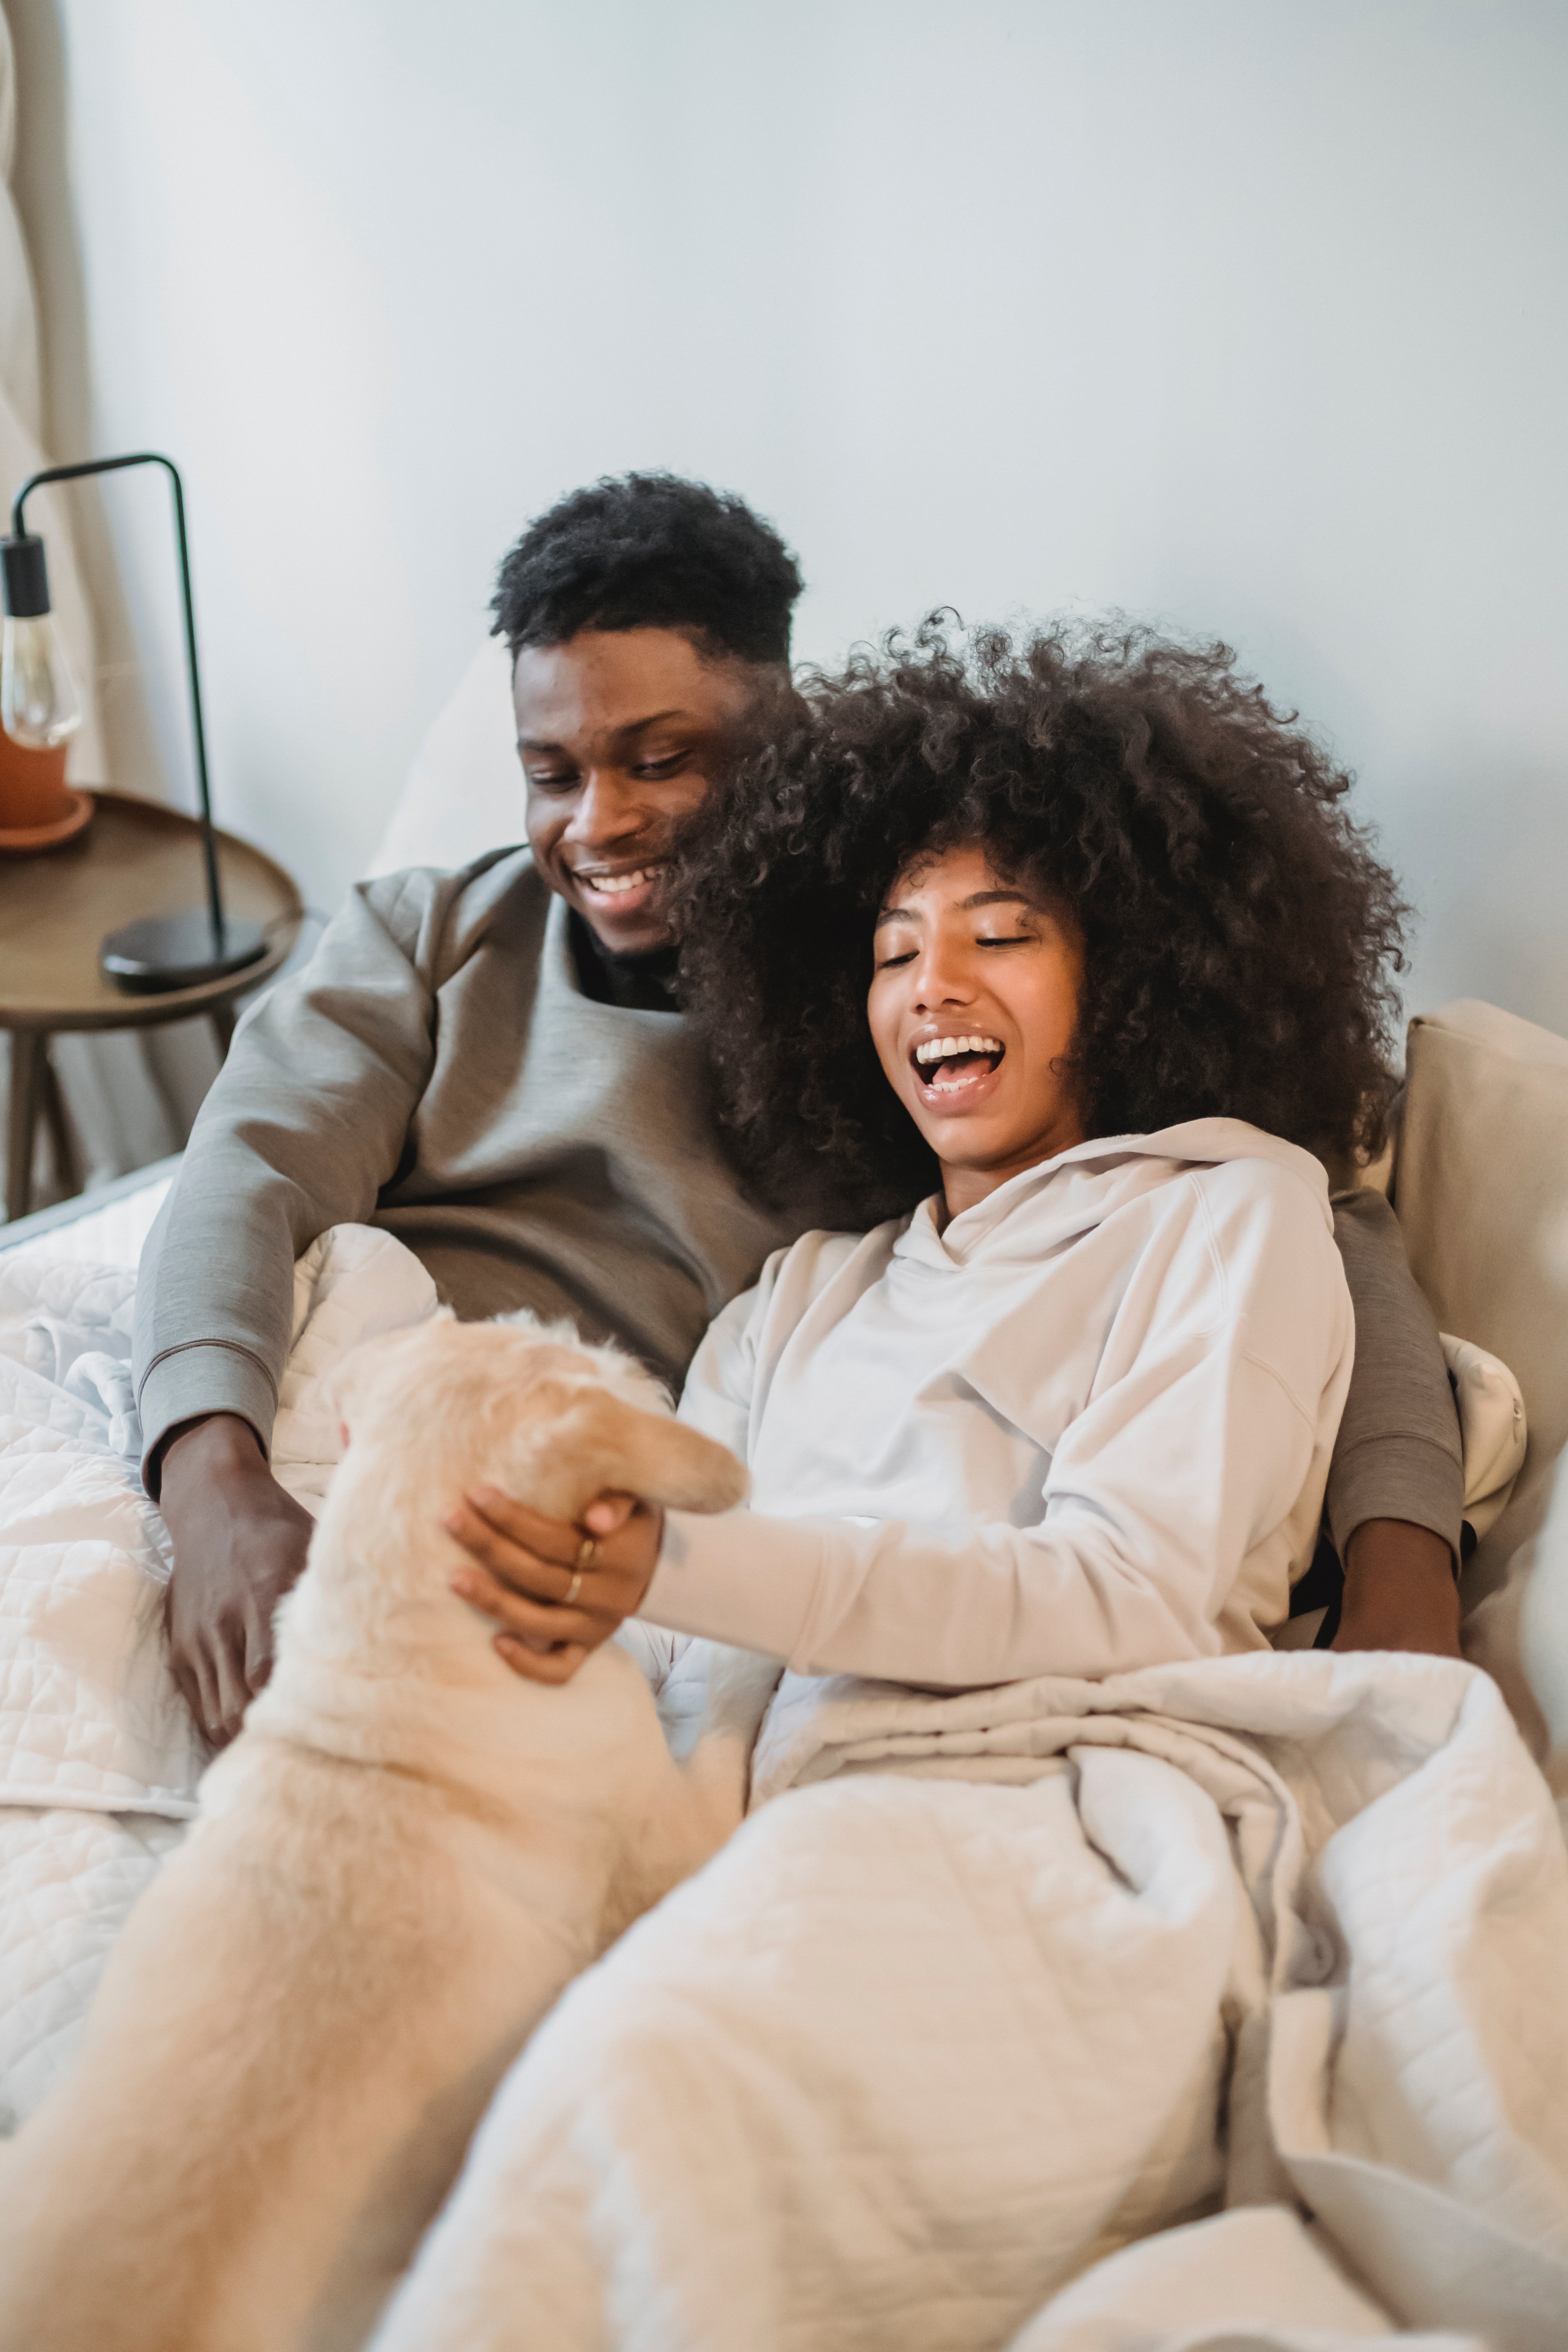 Pictured - A young couple snuggling up with their dog on the bed. | Source: Pexels 